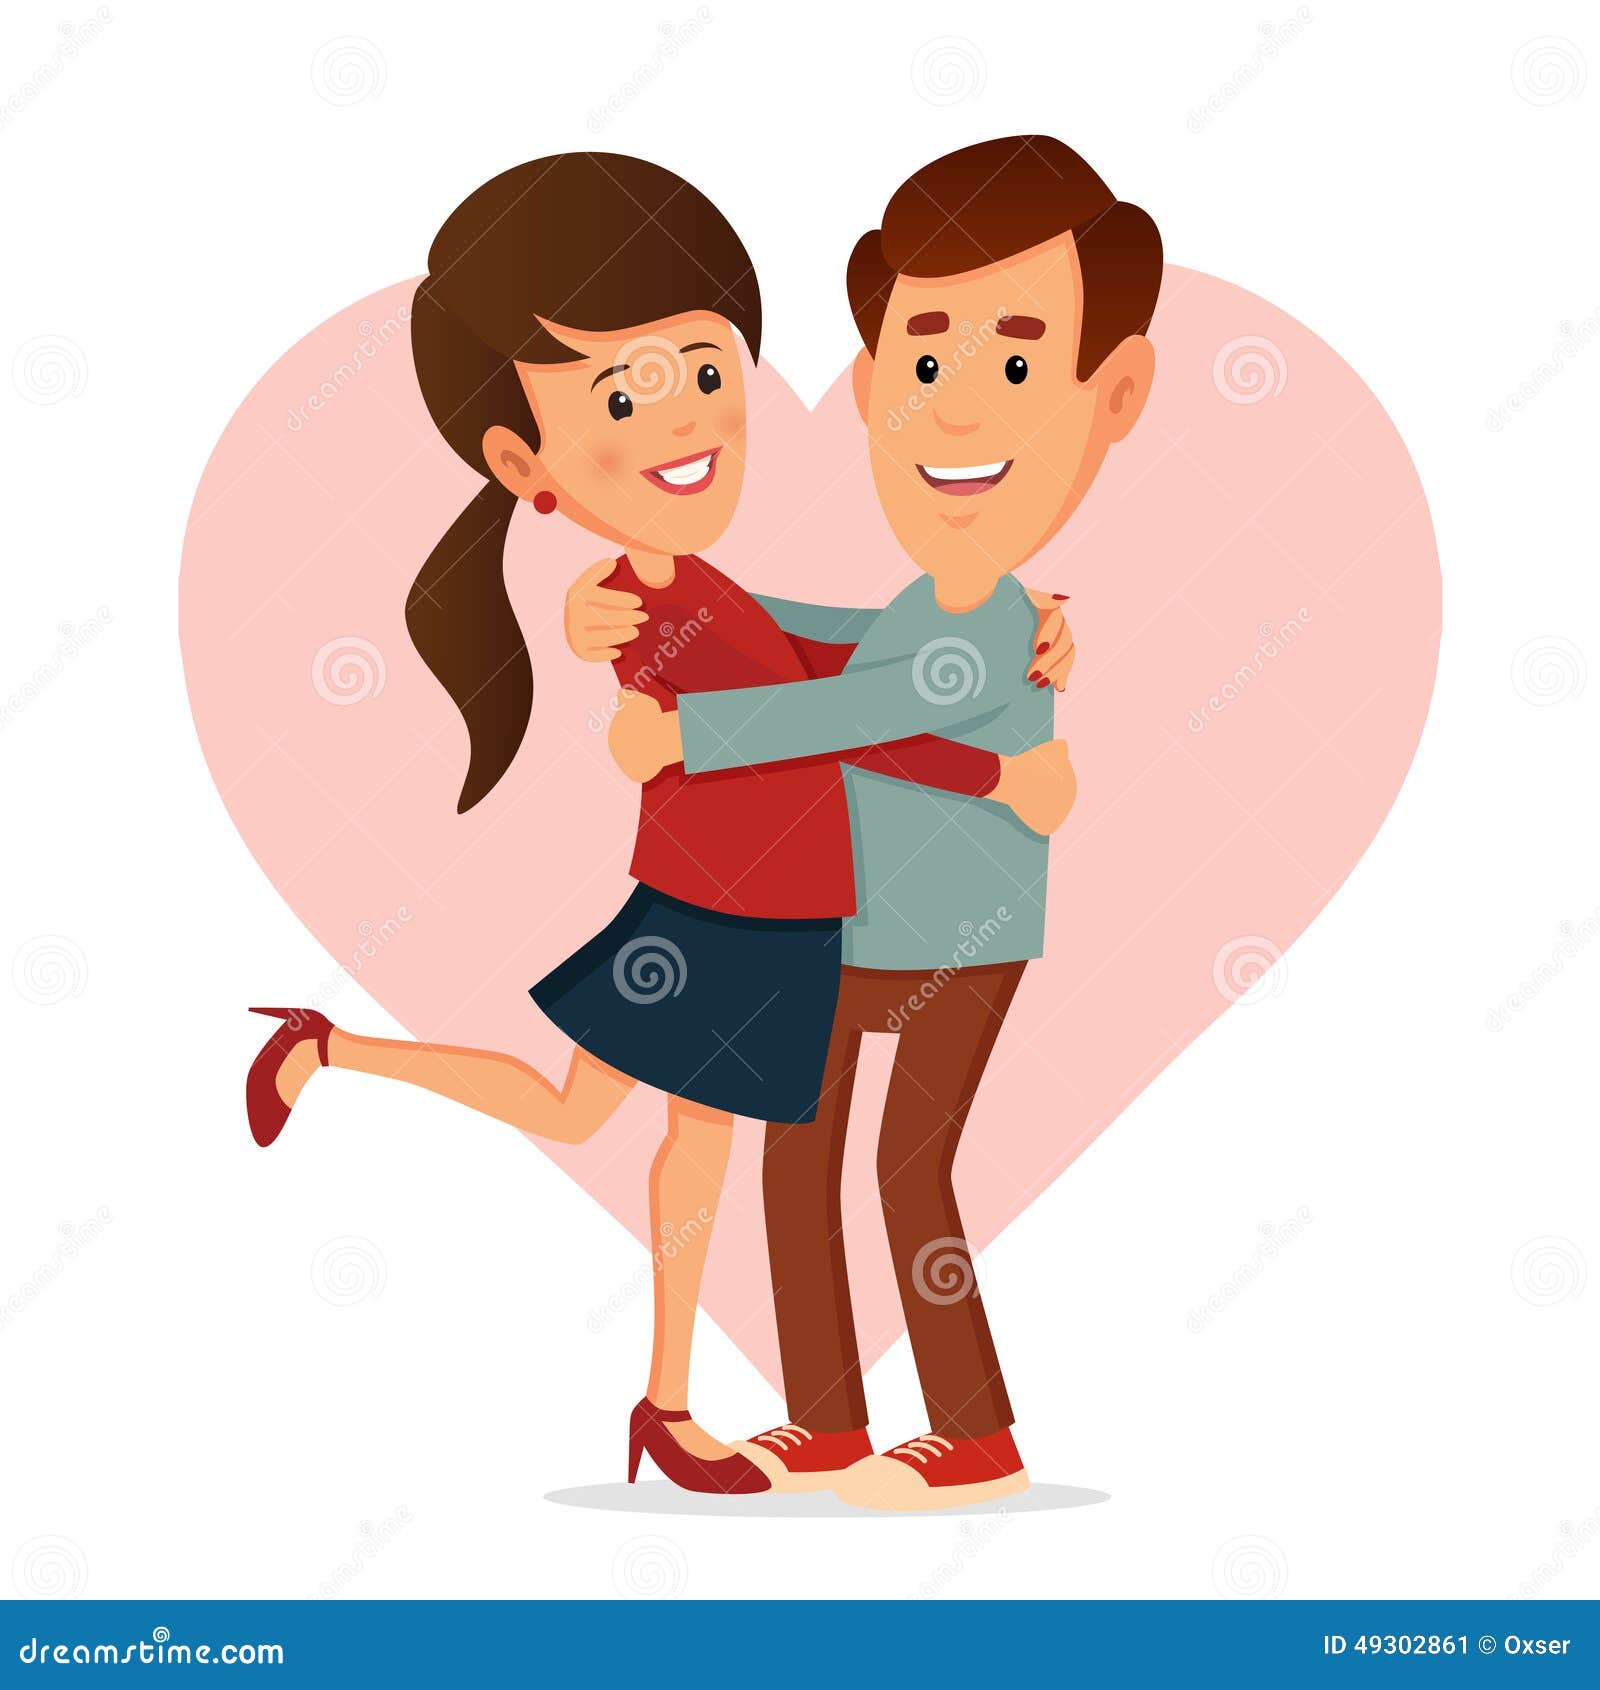 clipart of a happy couple - photo #39